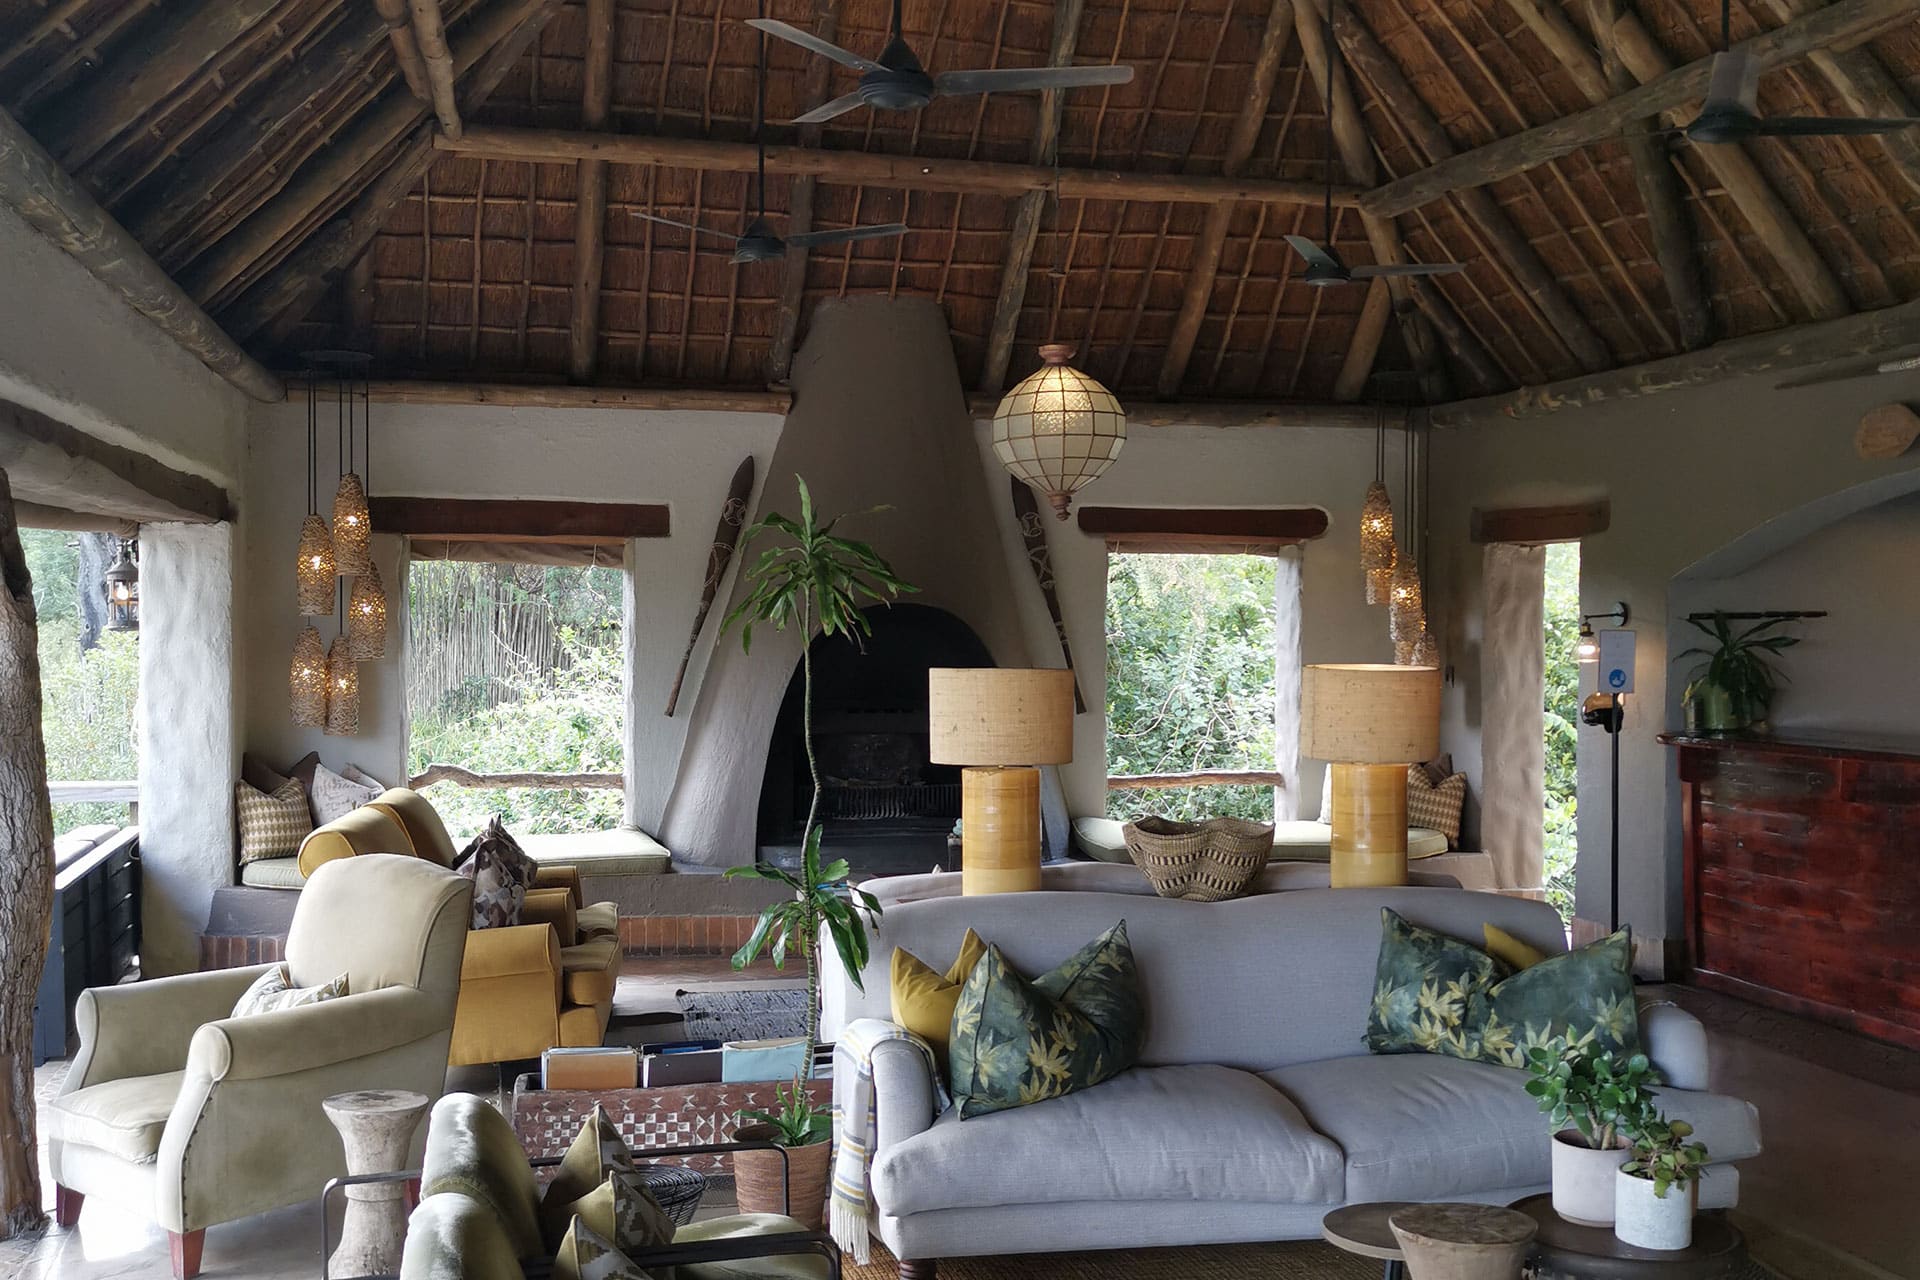 The main lounge area at Simbambili Game Lodge – a lodge from the Thornybush collection.